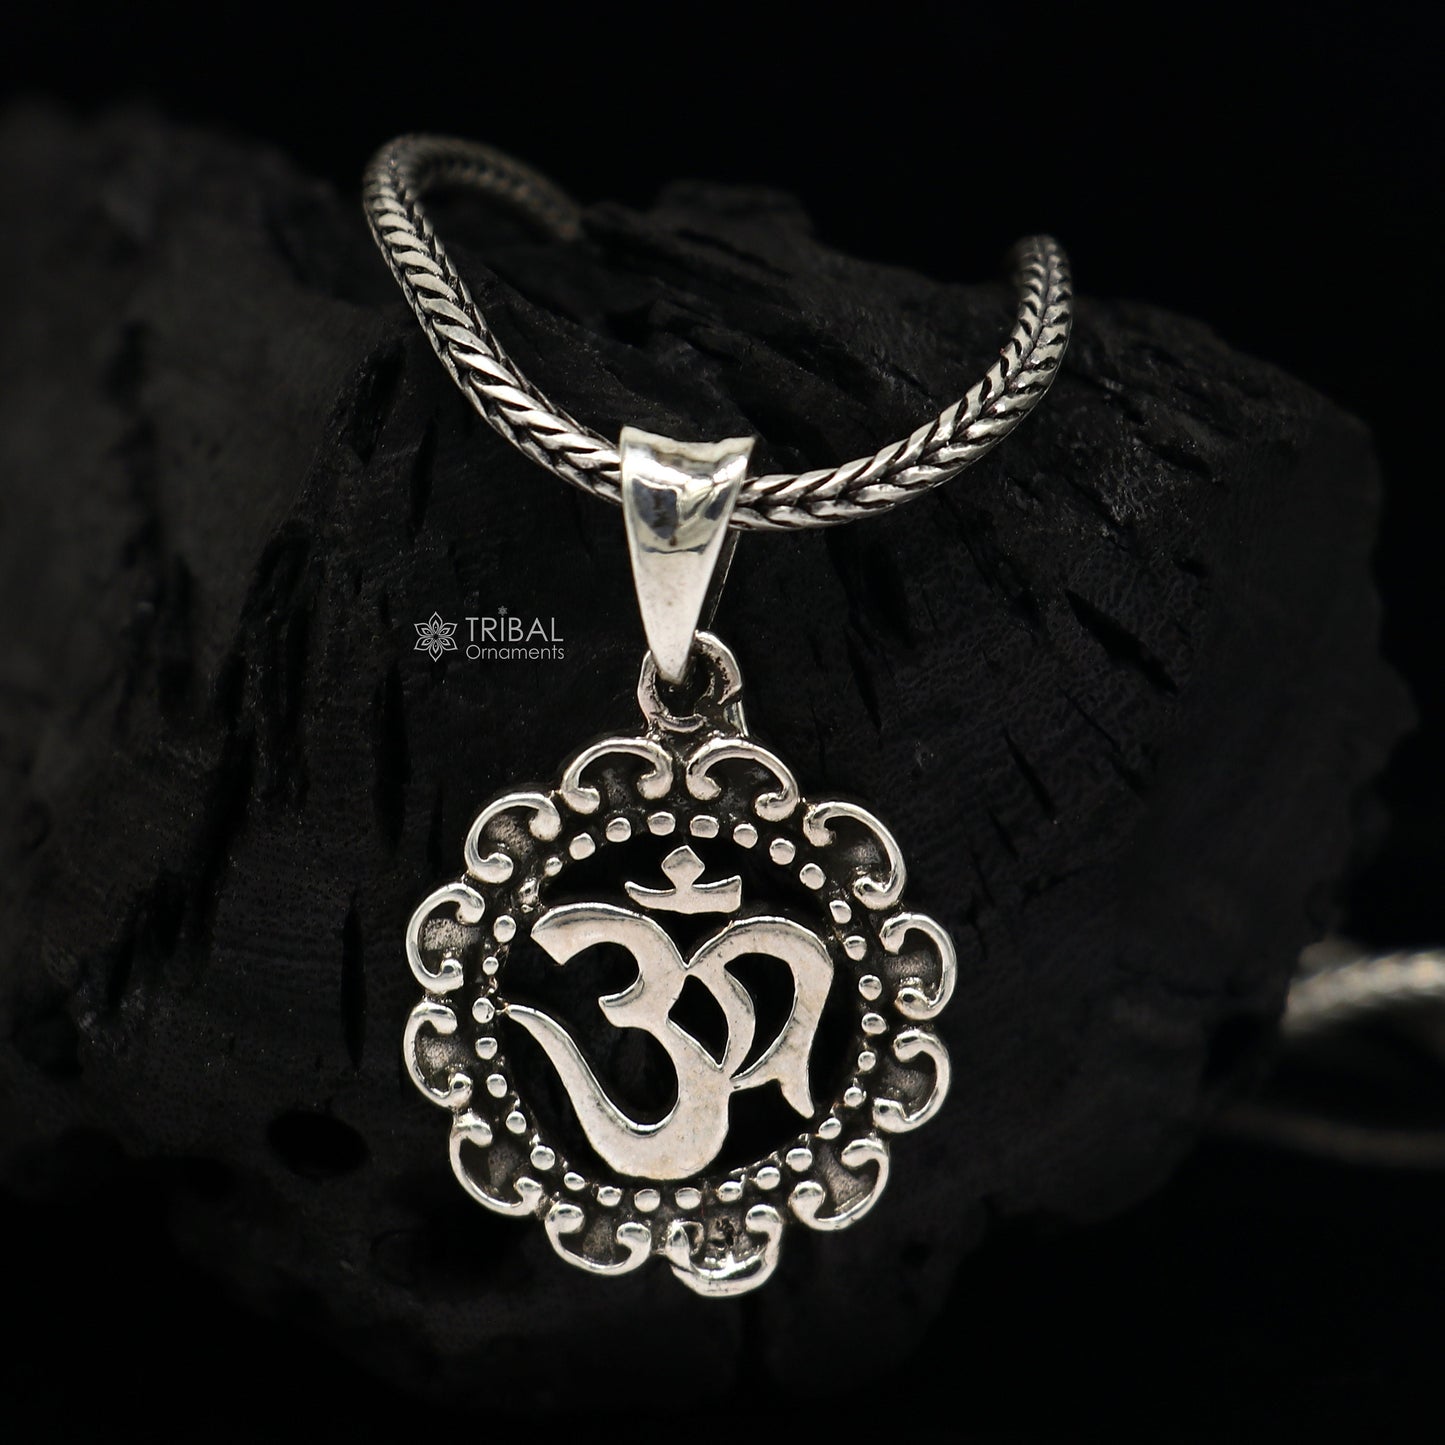 925 pure silver divine mantra AUM OR OM pendant best gifting pendant, wheat chain necklace locket best delicate unisex  jewelry nsp740 - TRIBAL ORNAMENTS